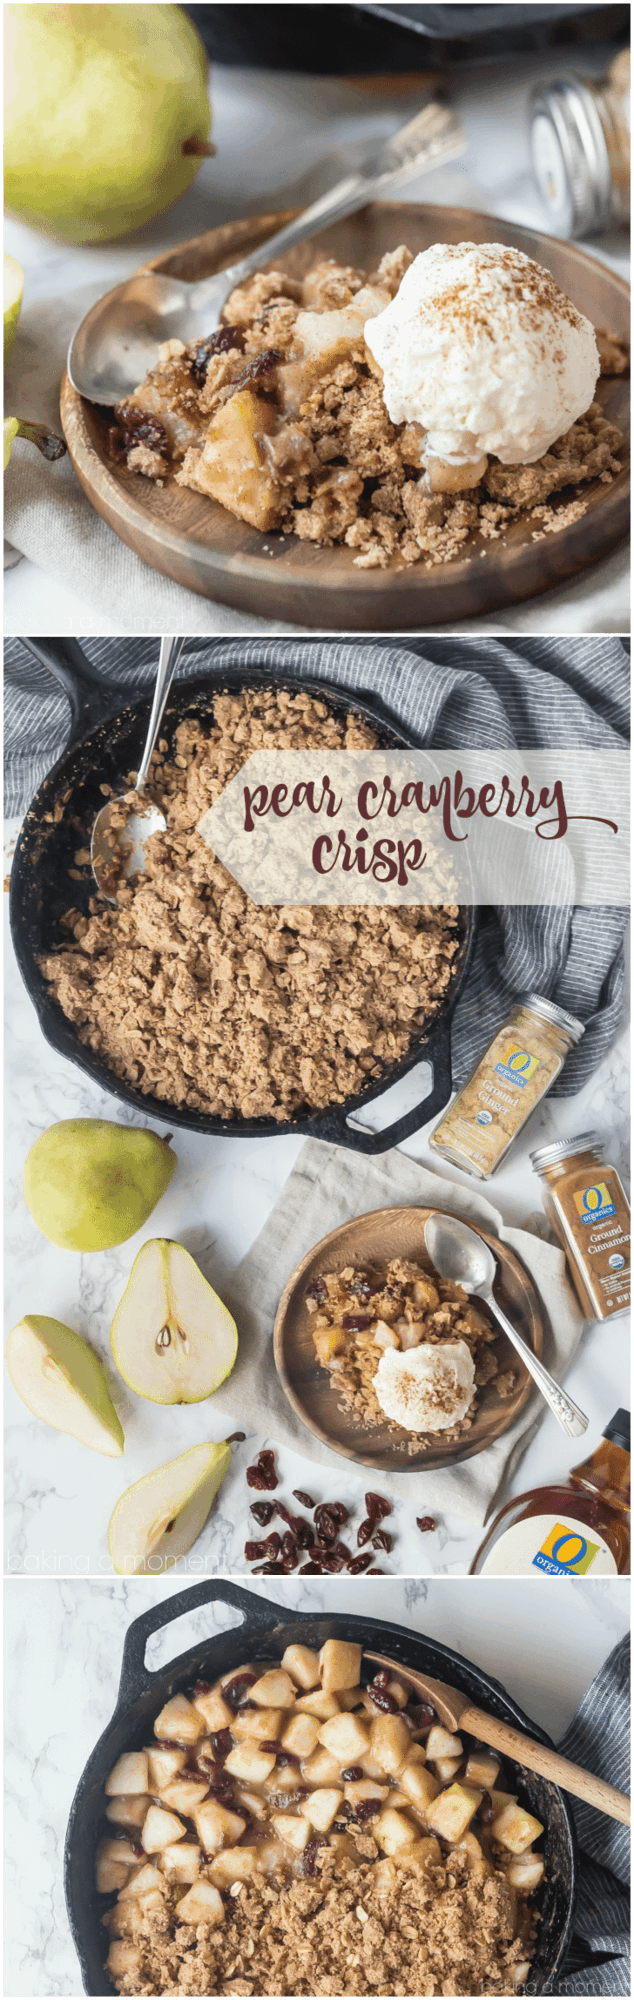 Pear cranberry crisp: a comforting cool-weather dessert! Sweetened with maple syrup, spiked with warm ginger, and topped with a buttery oatmeal pecan crumb.